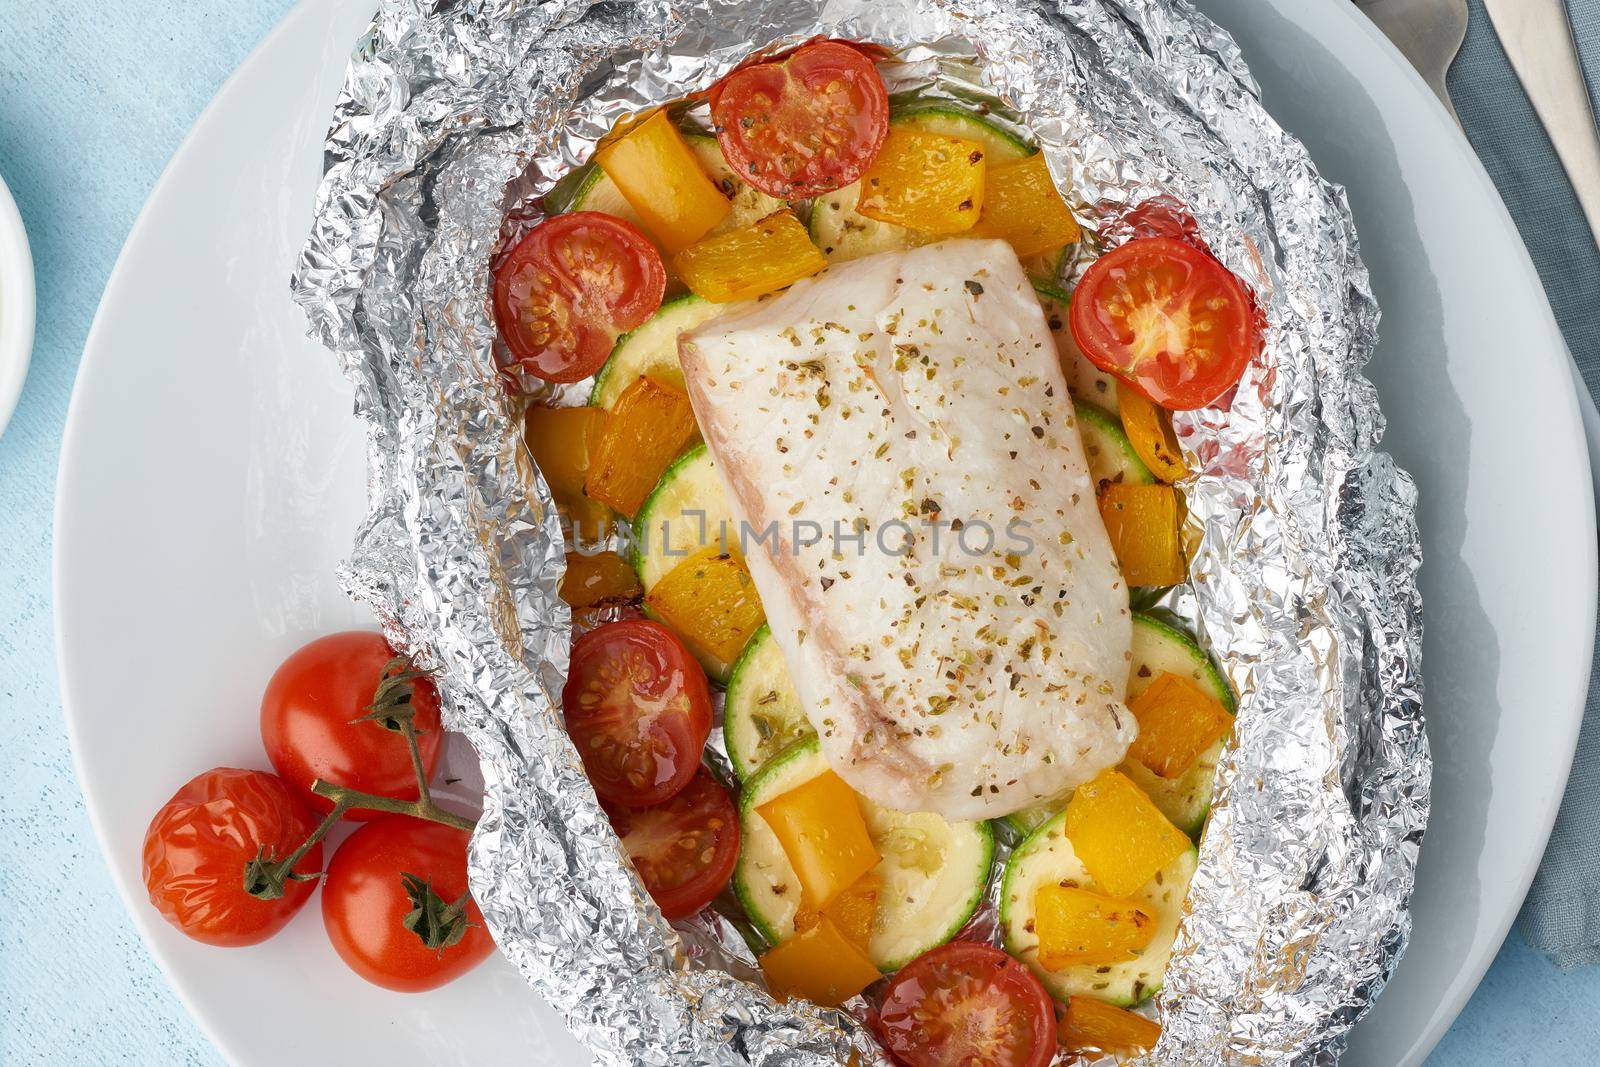 Foil pack dinner with white fish. Oven baked fillet of cod, pike perch with vegetables by NataBene